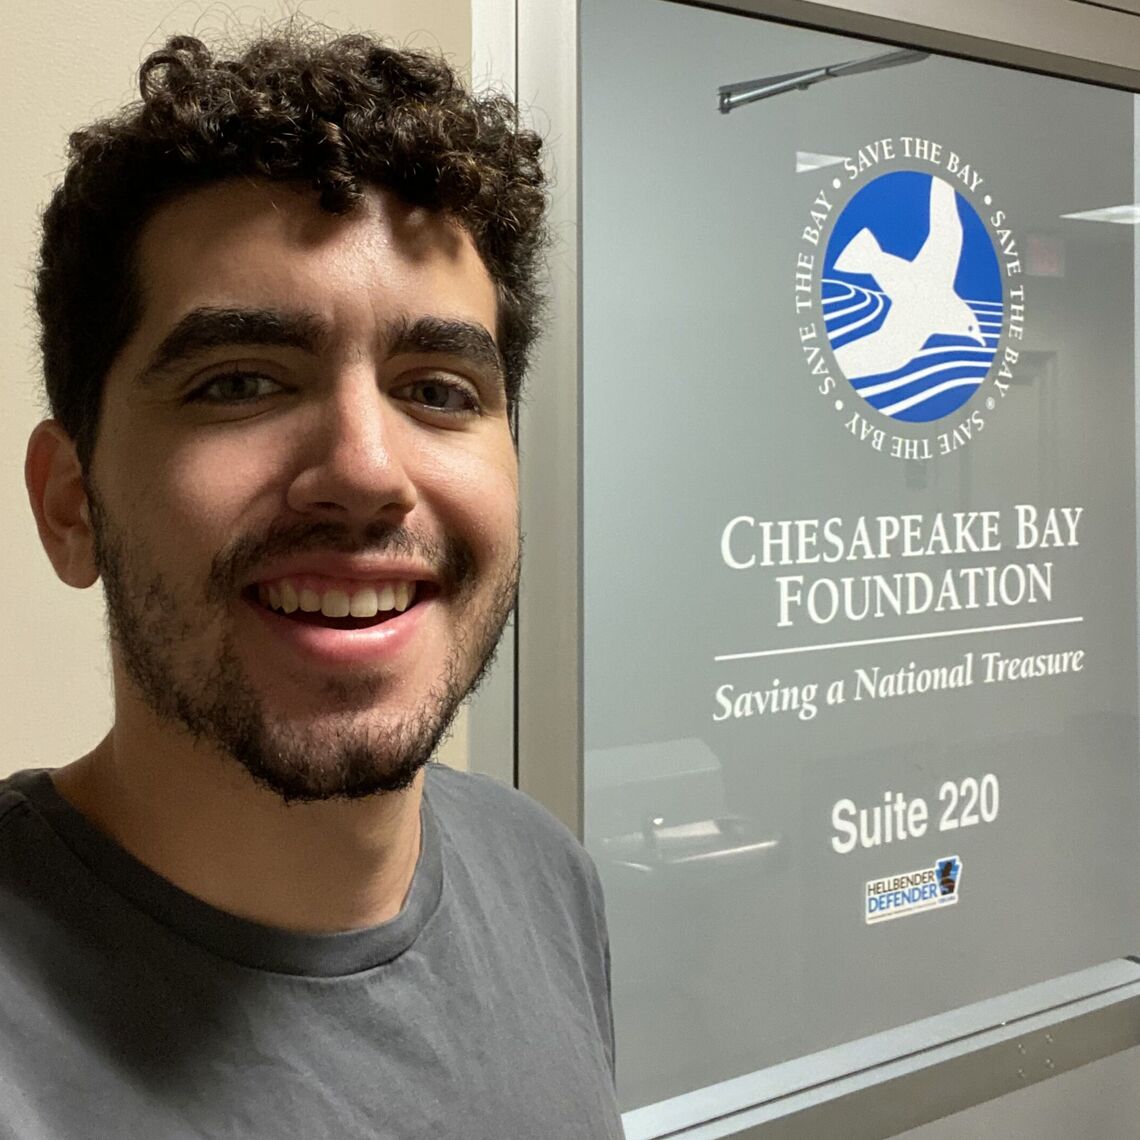 Andrew Canjura '23 says his summer internship with the Chesapeake Bay Foundation is "a good opportunity to see what other environmental jobs or careers entail. "